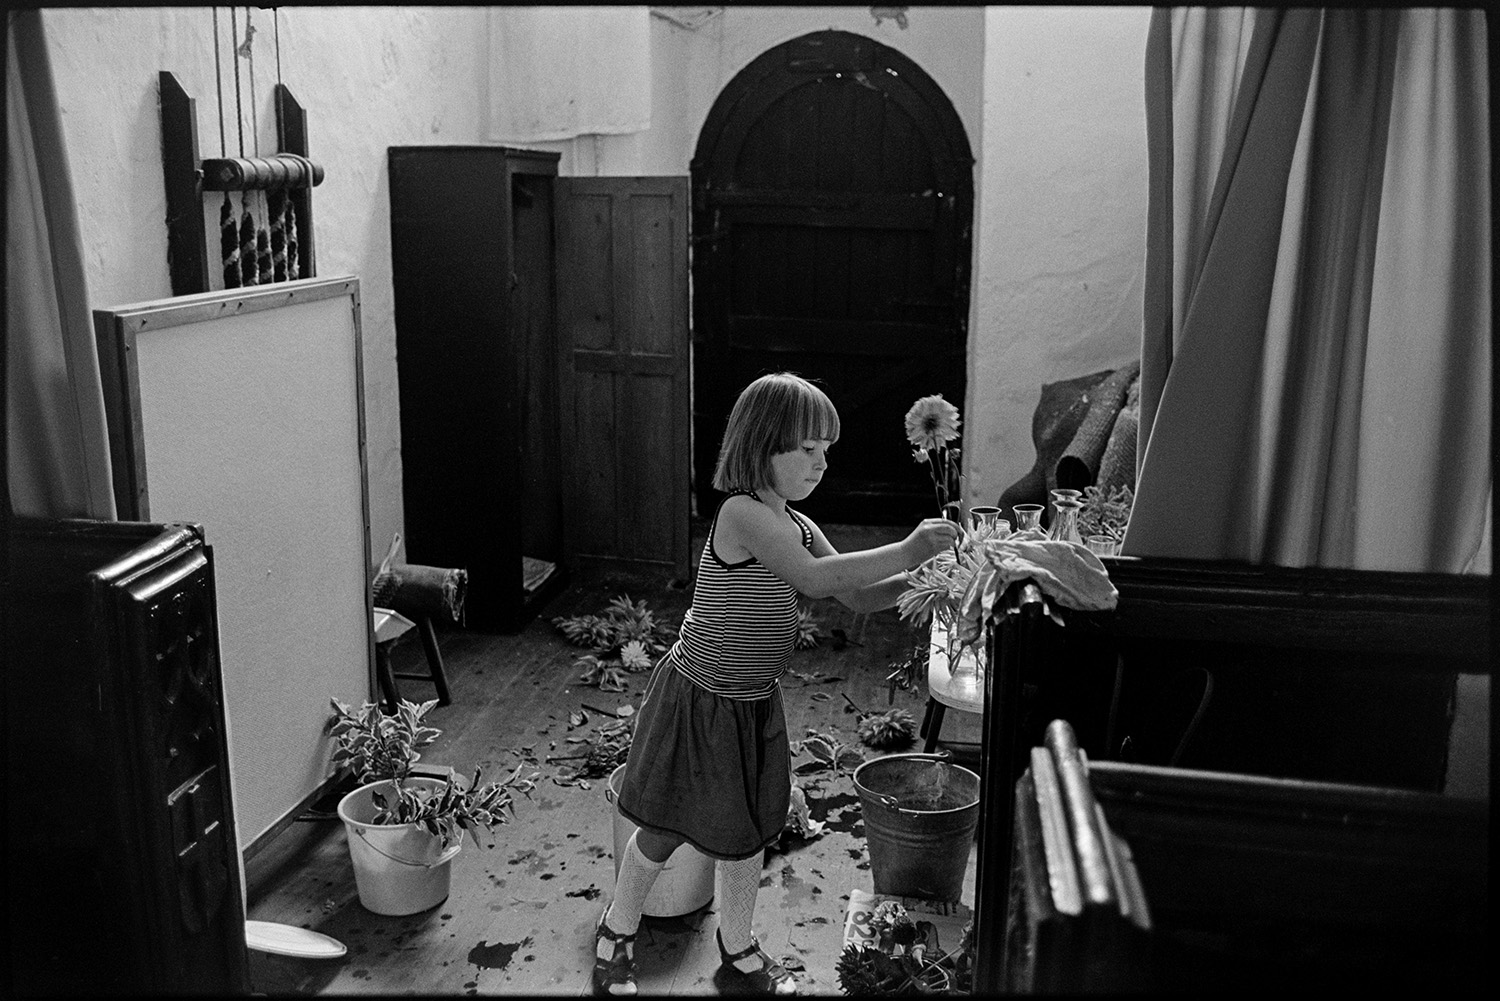 Women decorating church for Harvest Festival. Flowers.
[A girl surrounded by buckets and cut flowers in Dowland Church, arranging flowers in a jar for the Harvest Festival. Wooden pew ends can be seen in the foreground and bell ropes are visible against a wall behind her.]